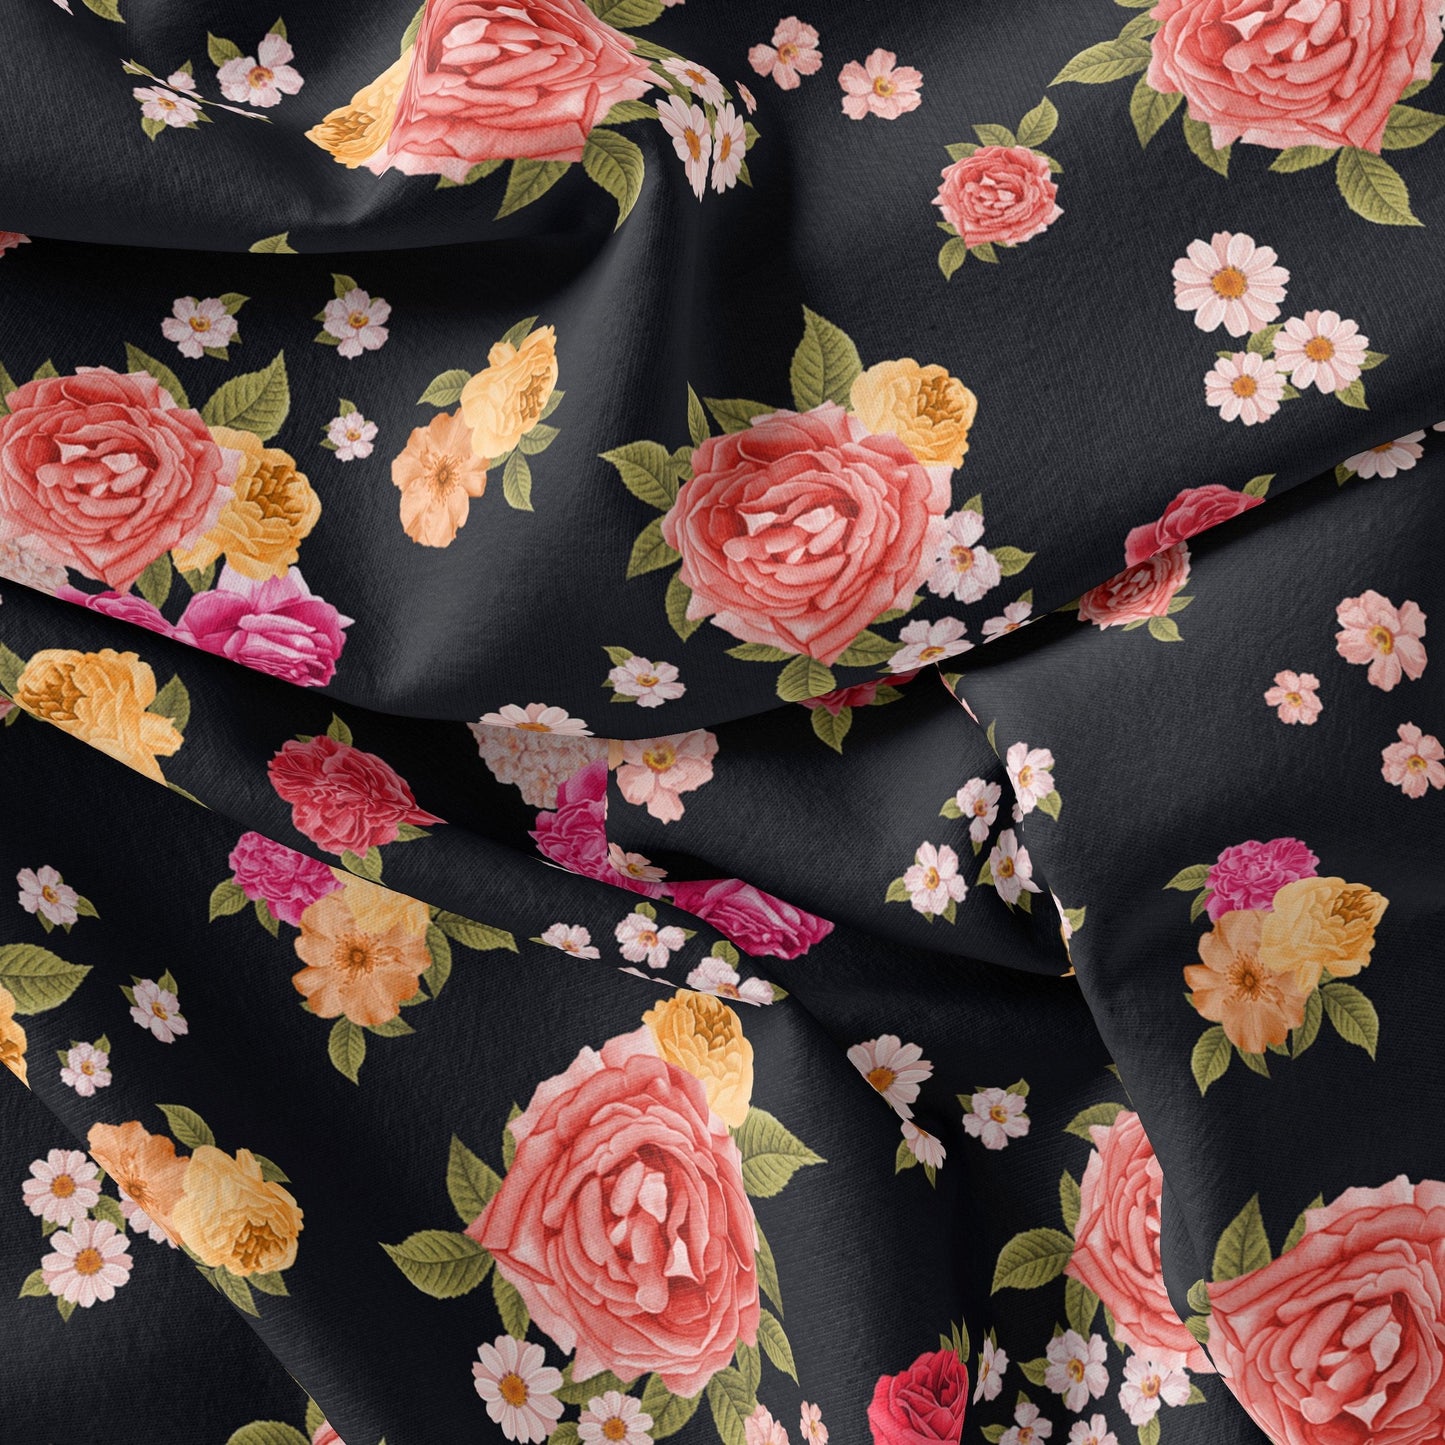 Multicolour Anemone Roses With Digital Printed Fabric - Pure Muslin - FAB VOGUE Studio®